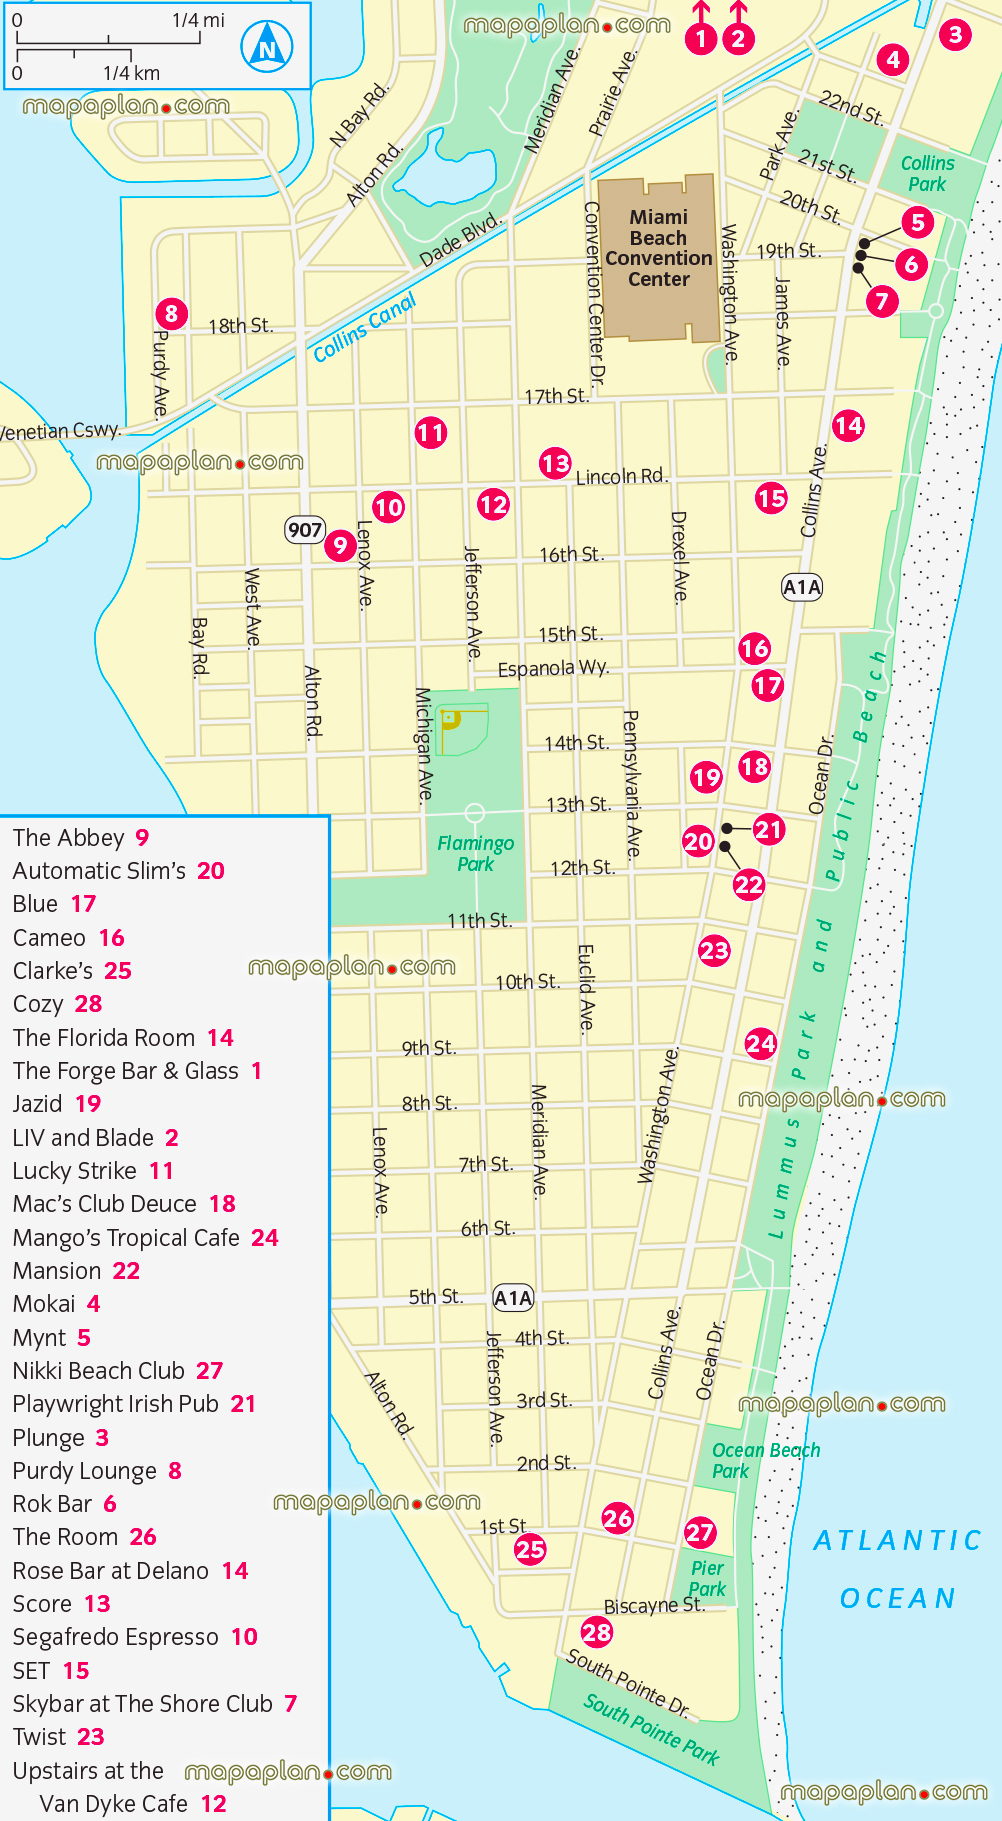 south beach nightlife guide dance clubs bars pubs visitors urban navigation directions best entertainment spots